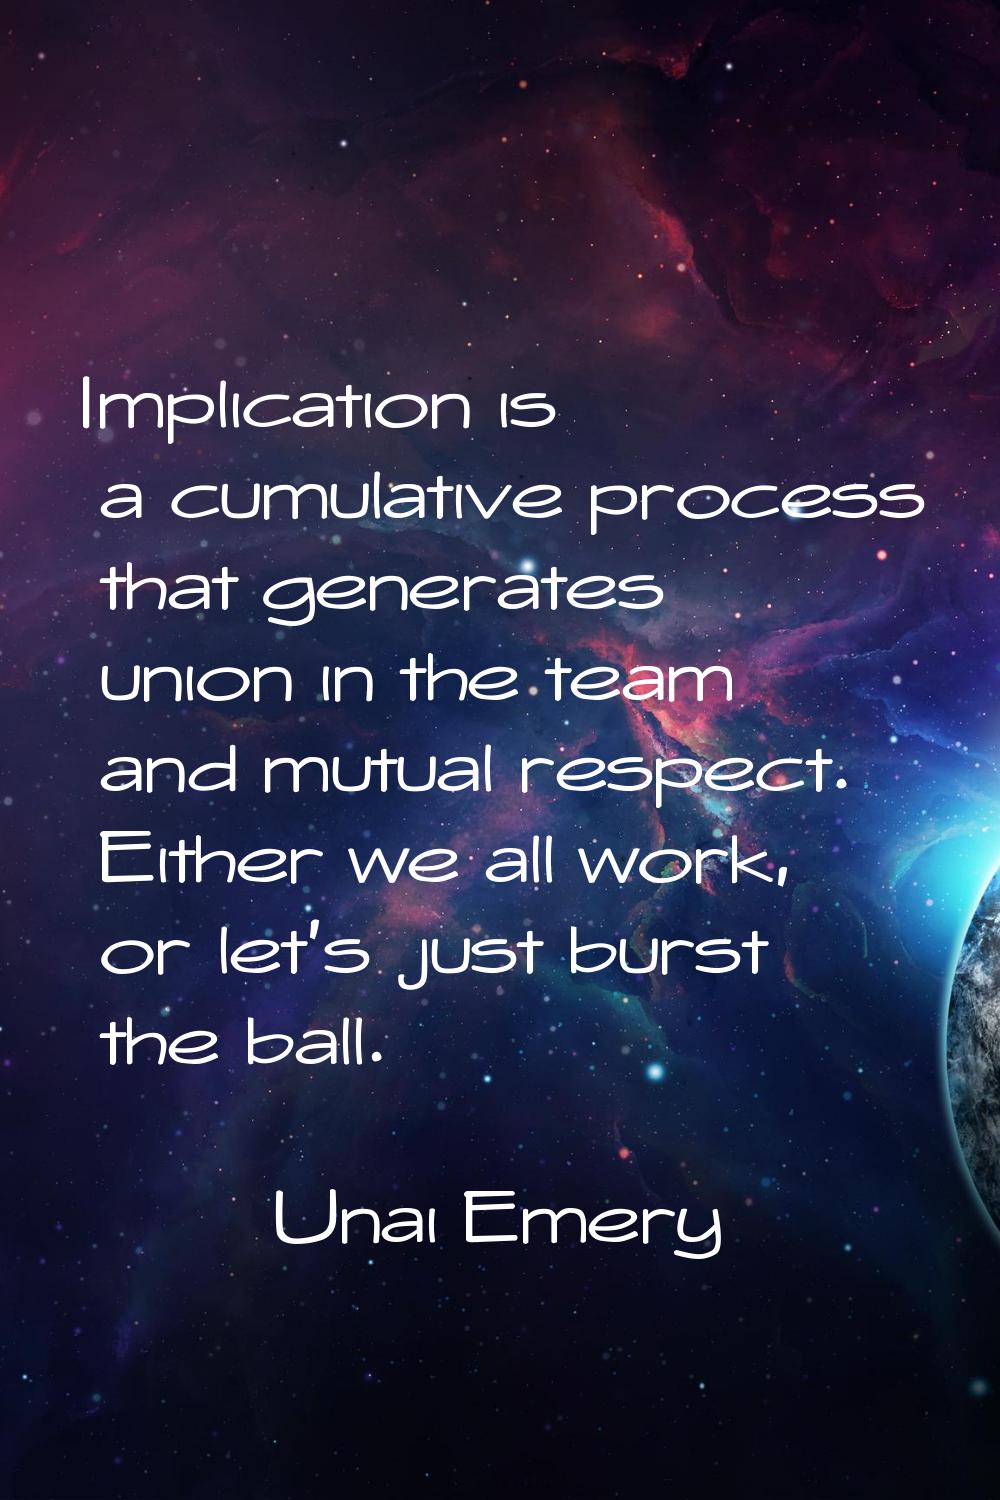 Implication is a cumulative process that generates union in the team and mutual respect. Either we 